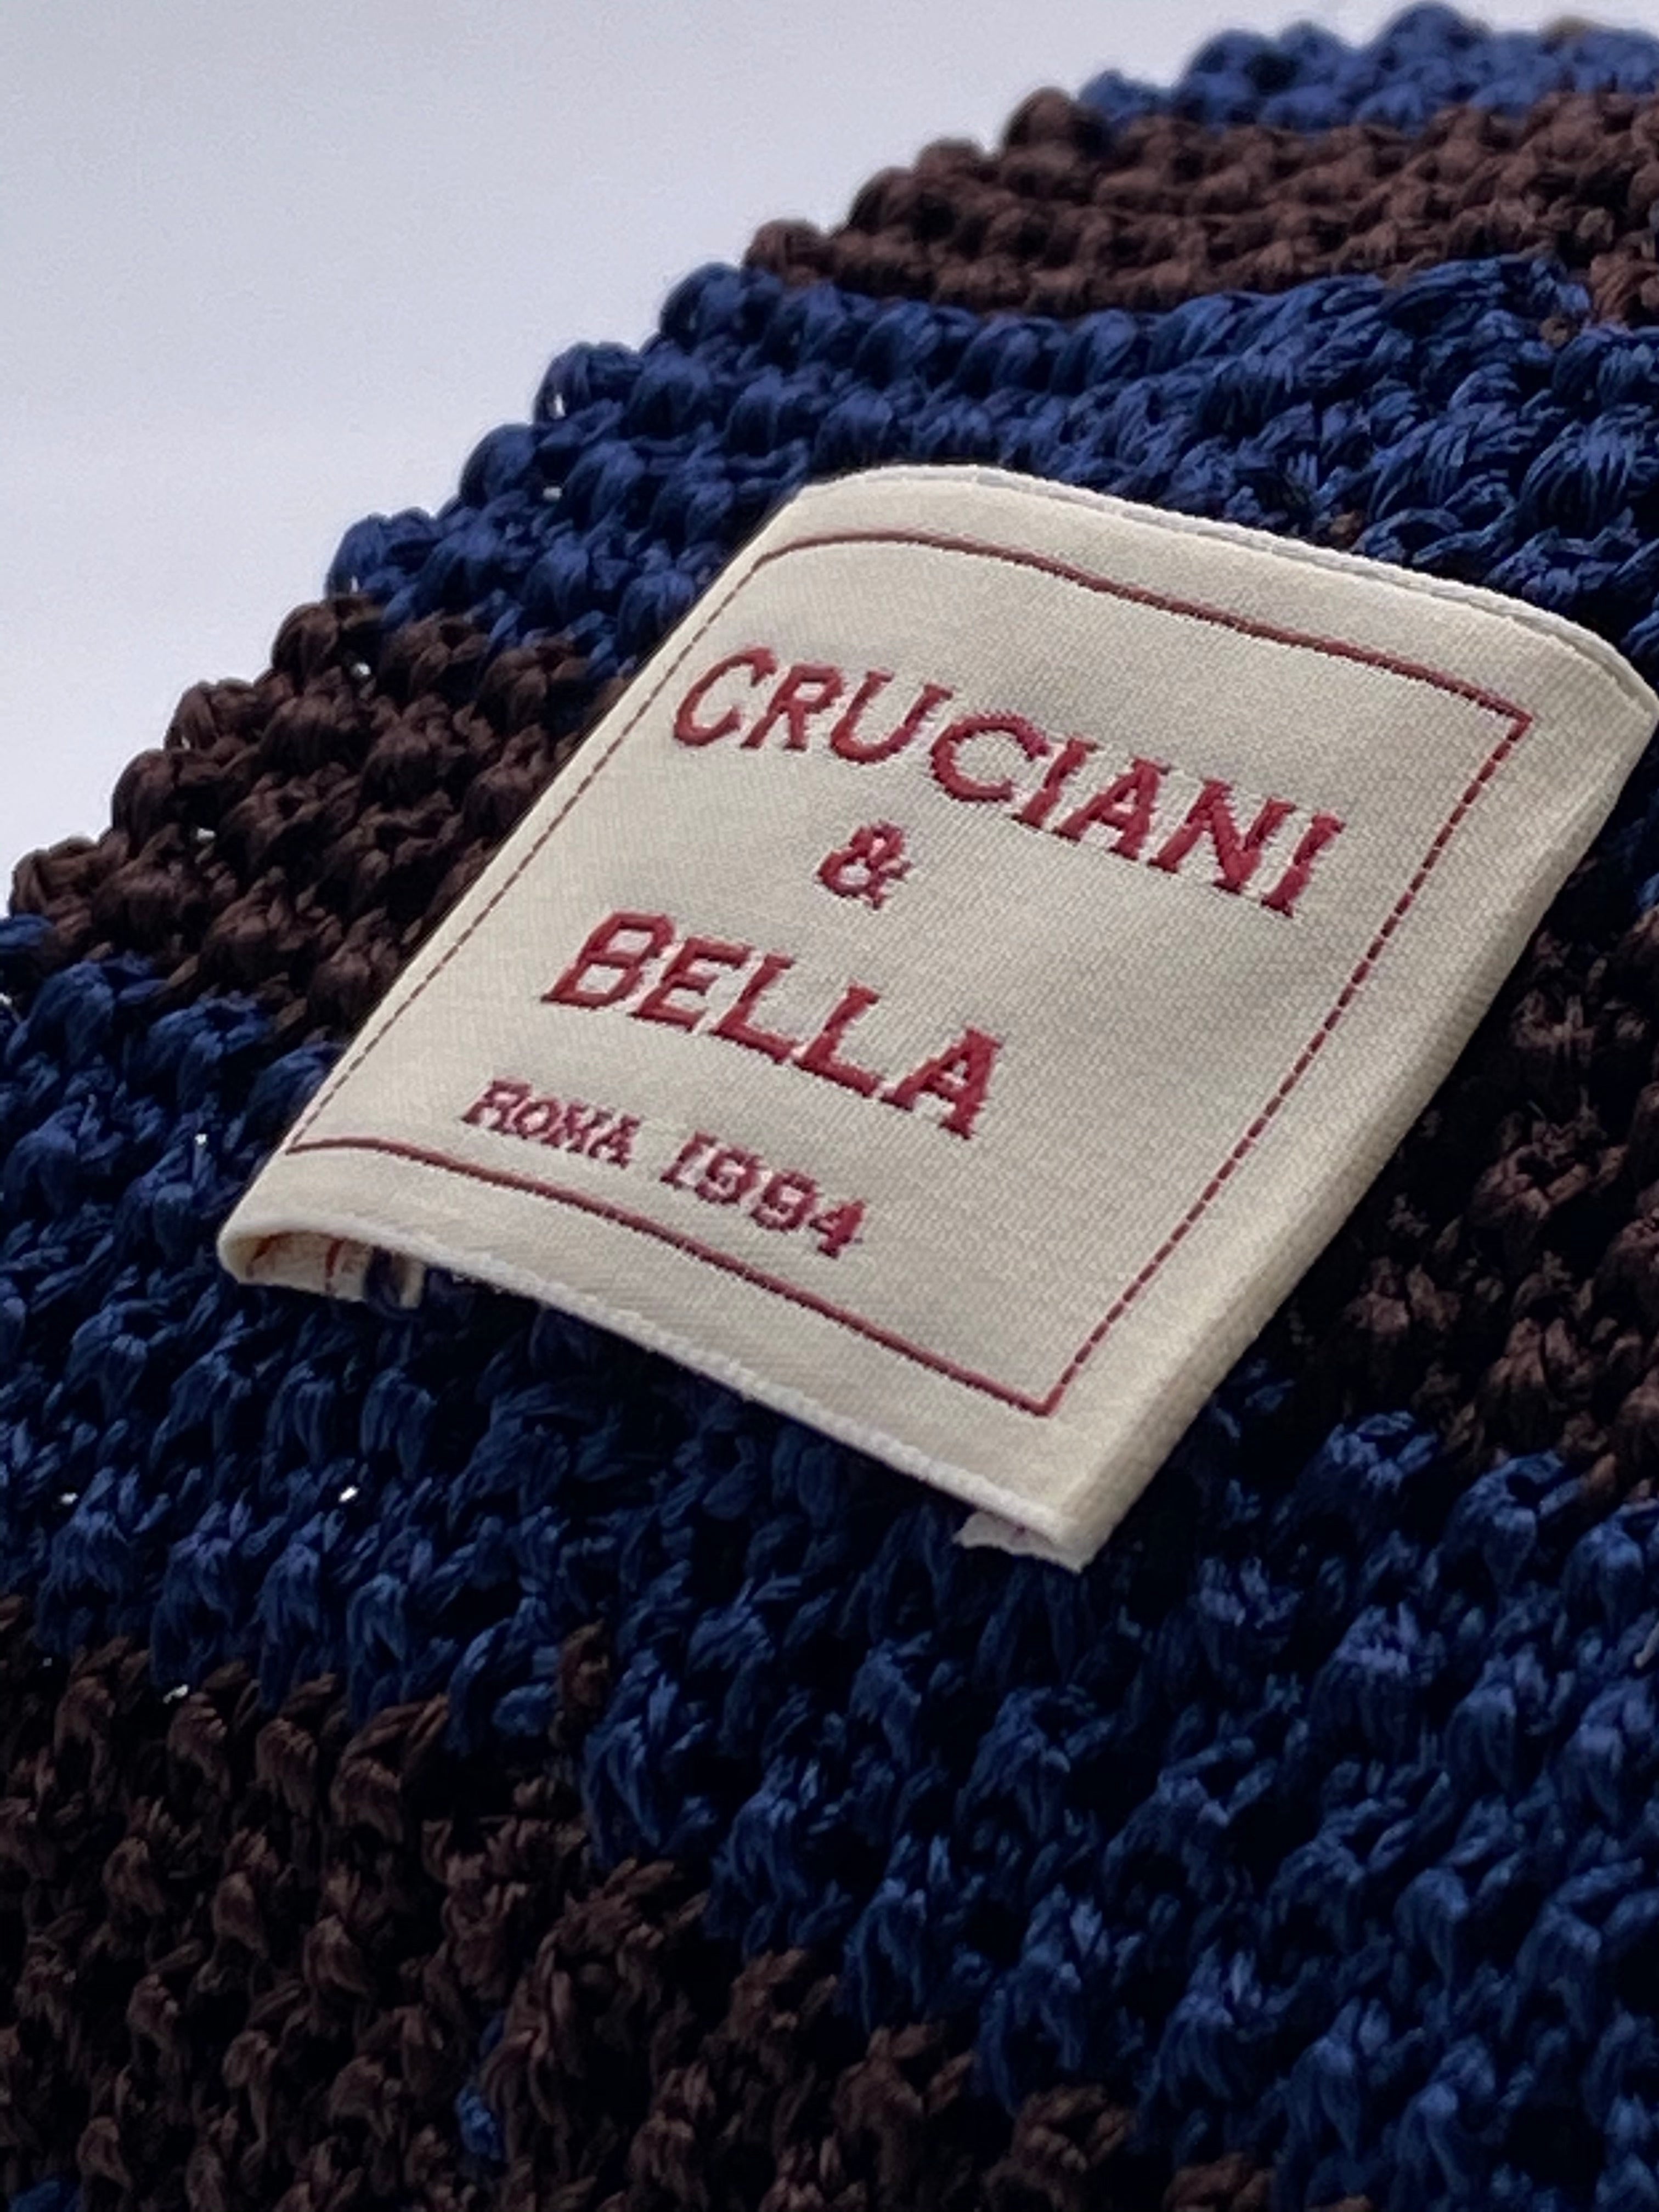 Cruciani & Bella 100% Knitted Silk Blue and Brown stripe tie Handmade in Italy 6 cm x 147 cm